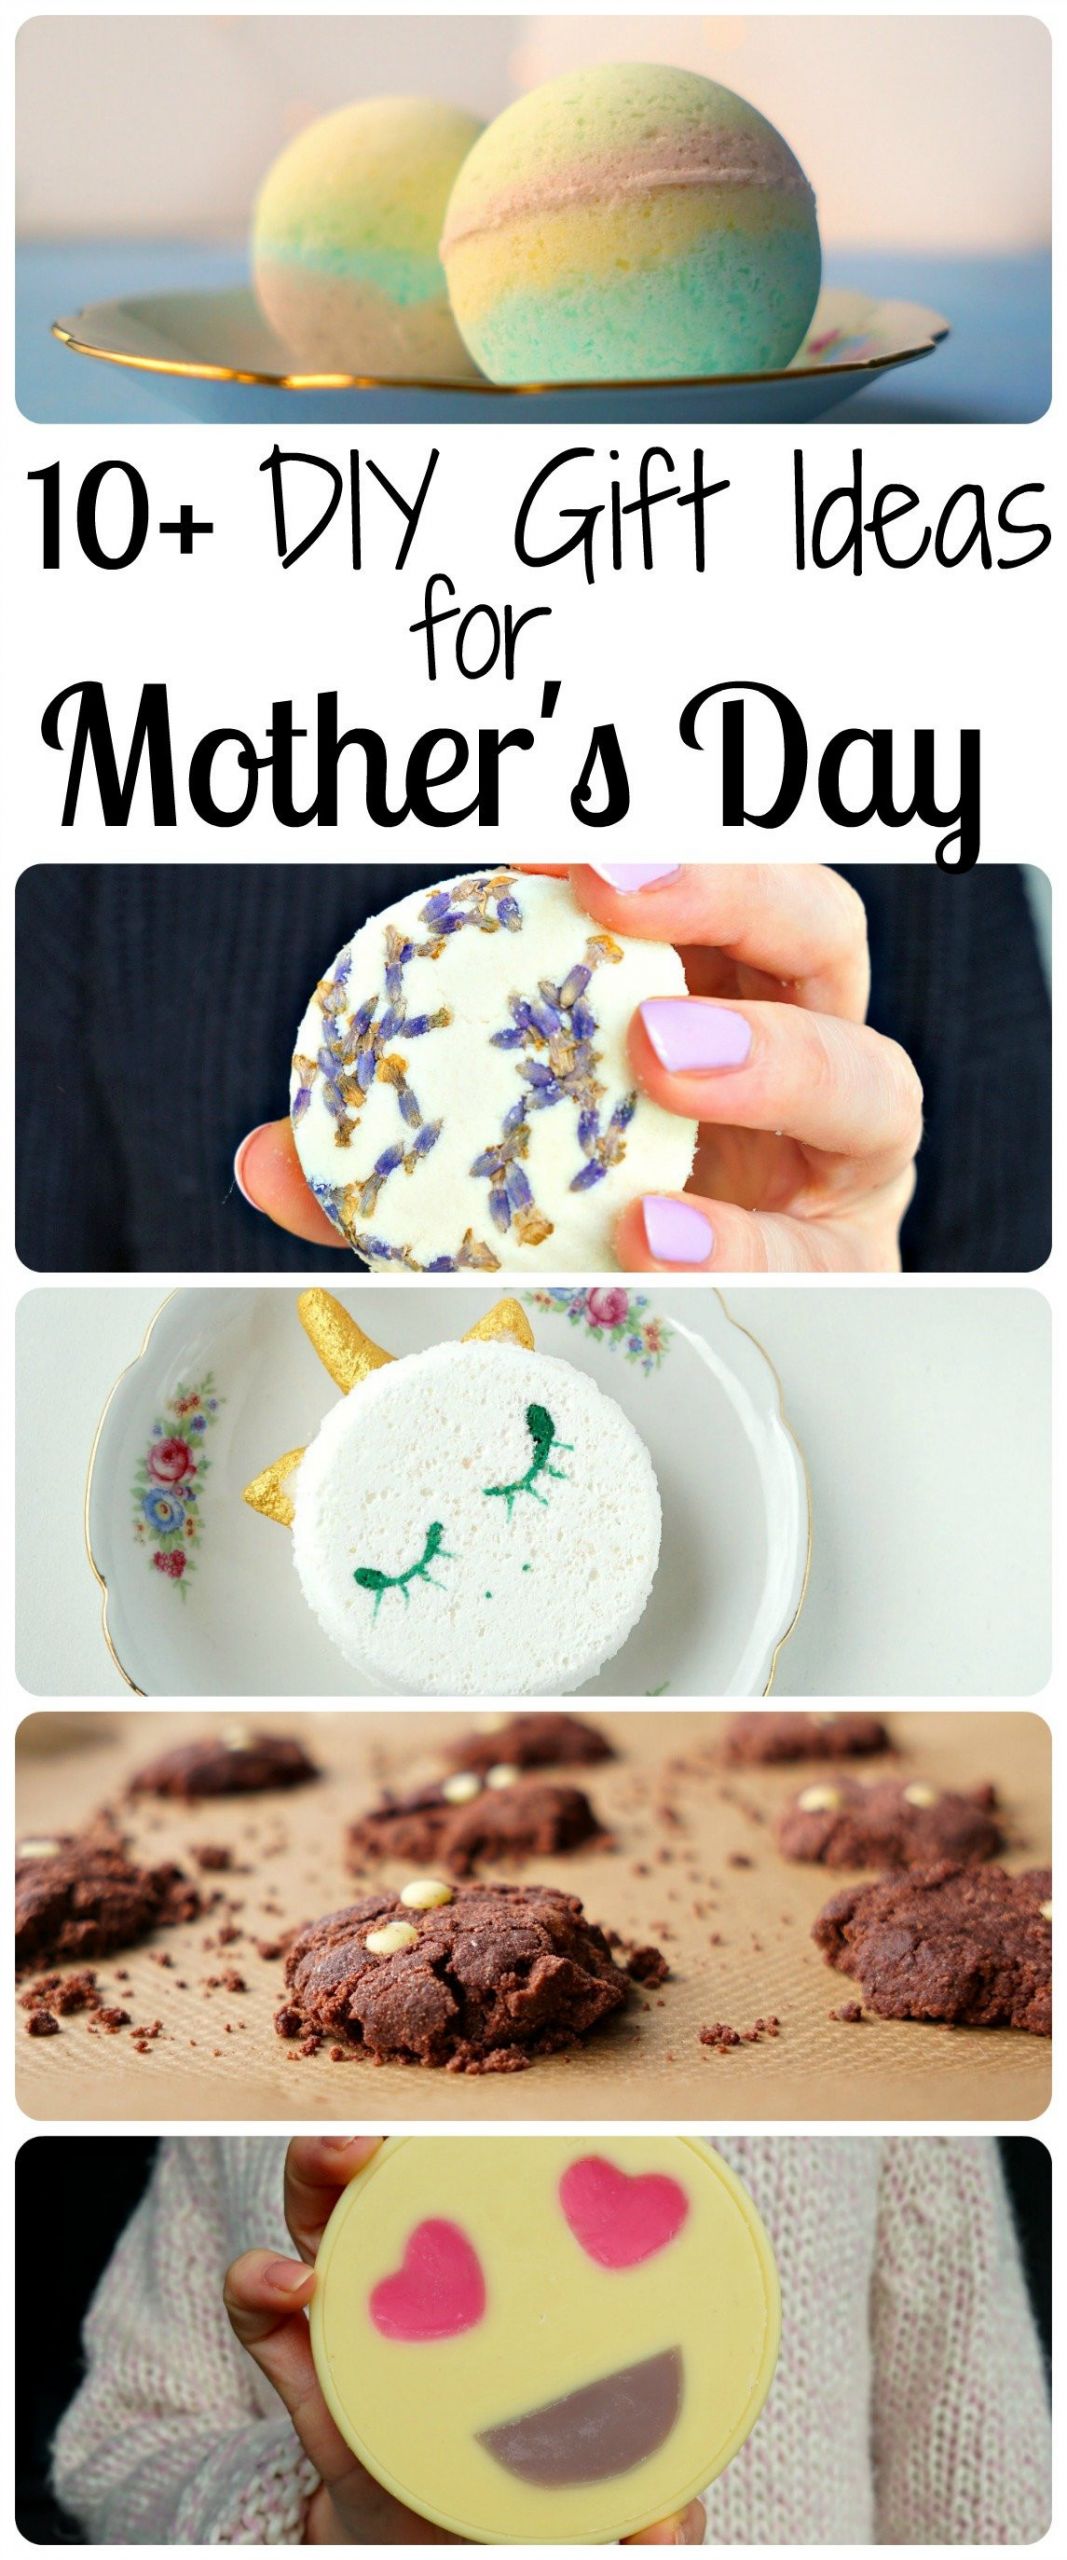 Mother'S Day Gift Ideas To Make At Home
 30 Gift Ideas for Mother s Day to Buy or DIY The Makeup